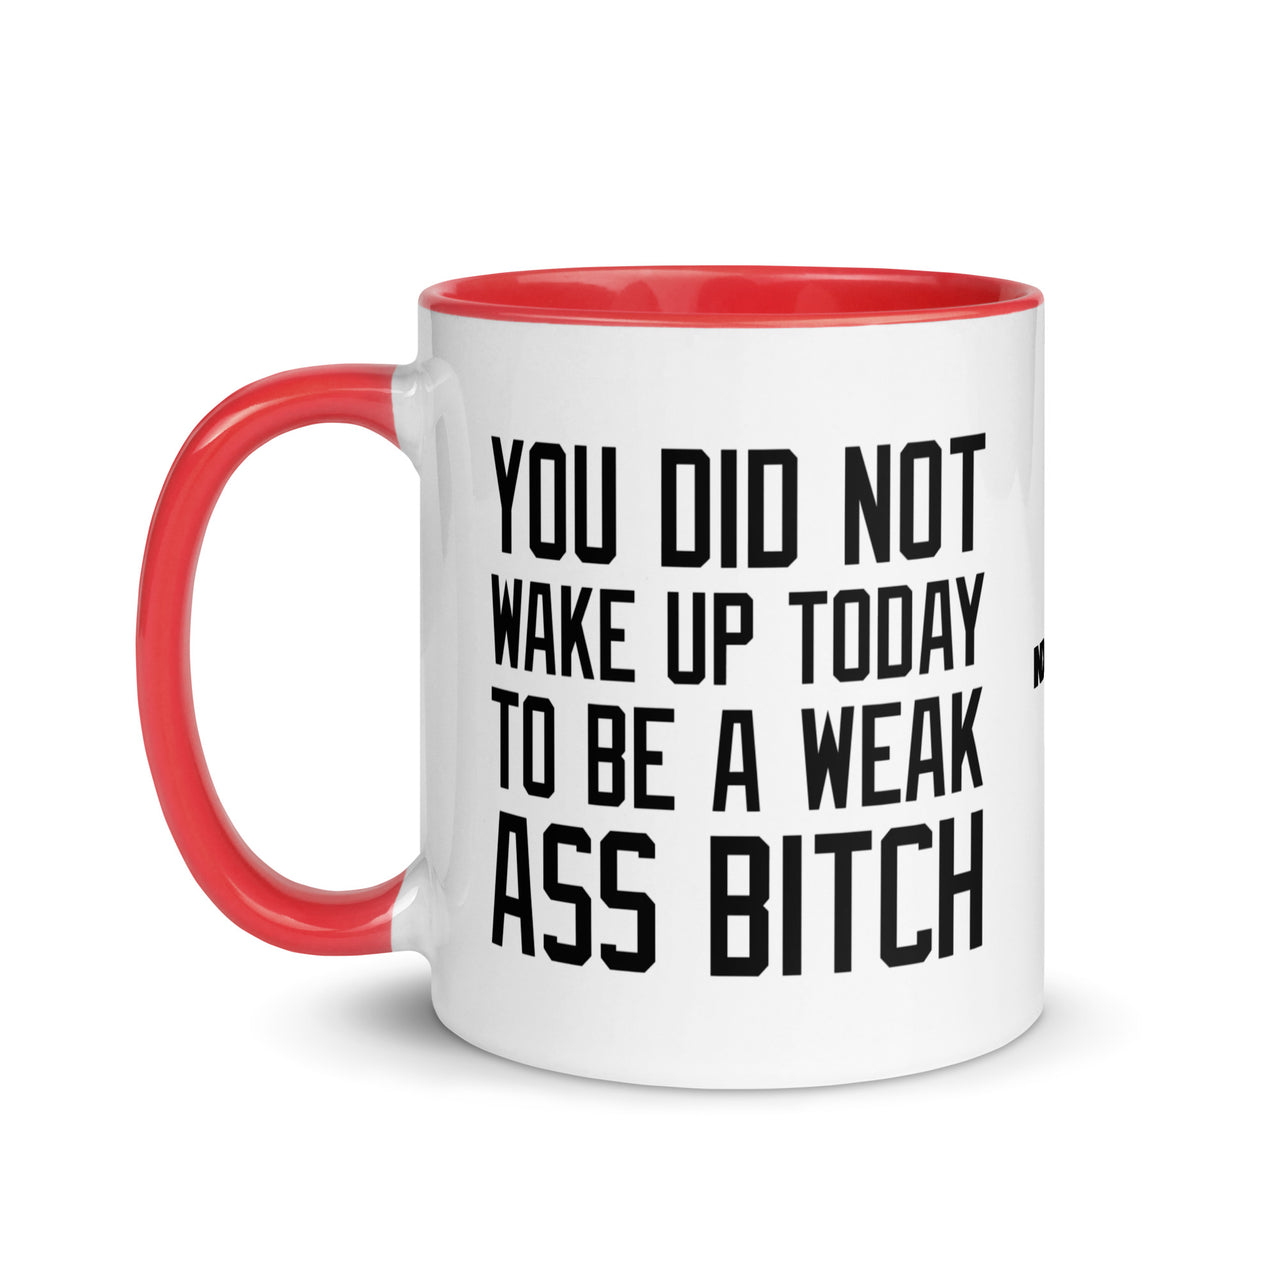 "You did not wake up today to..." 11oz two tone coffee mug multiple colors - Shady Lion Coffee Co.